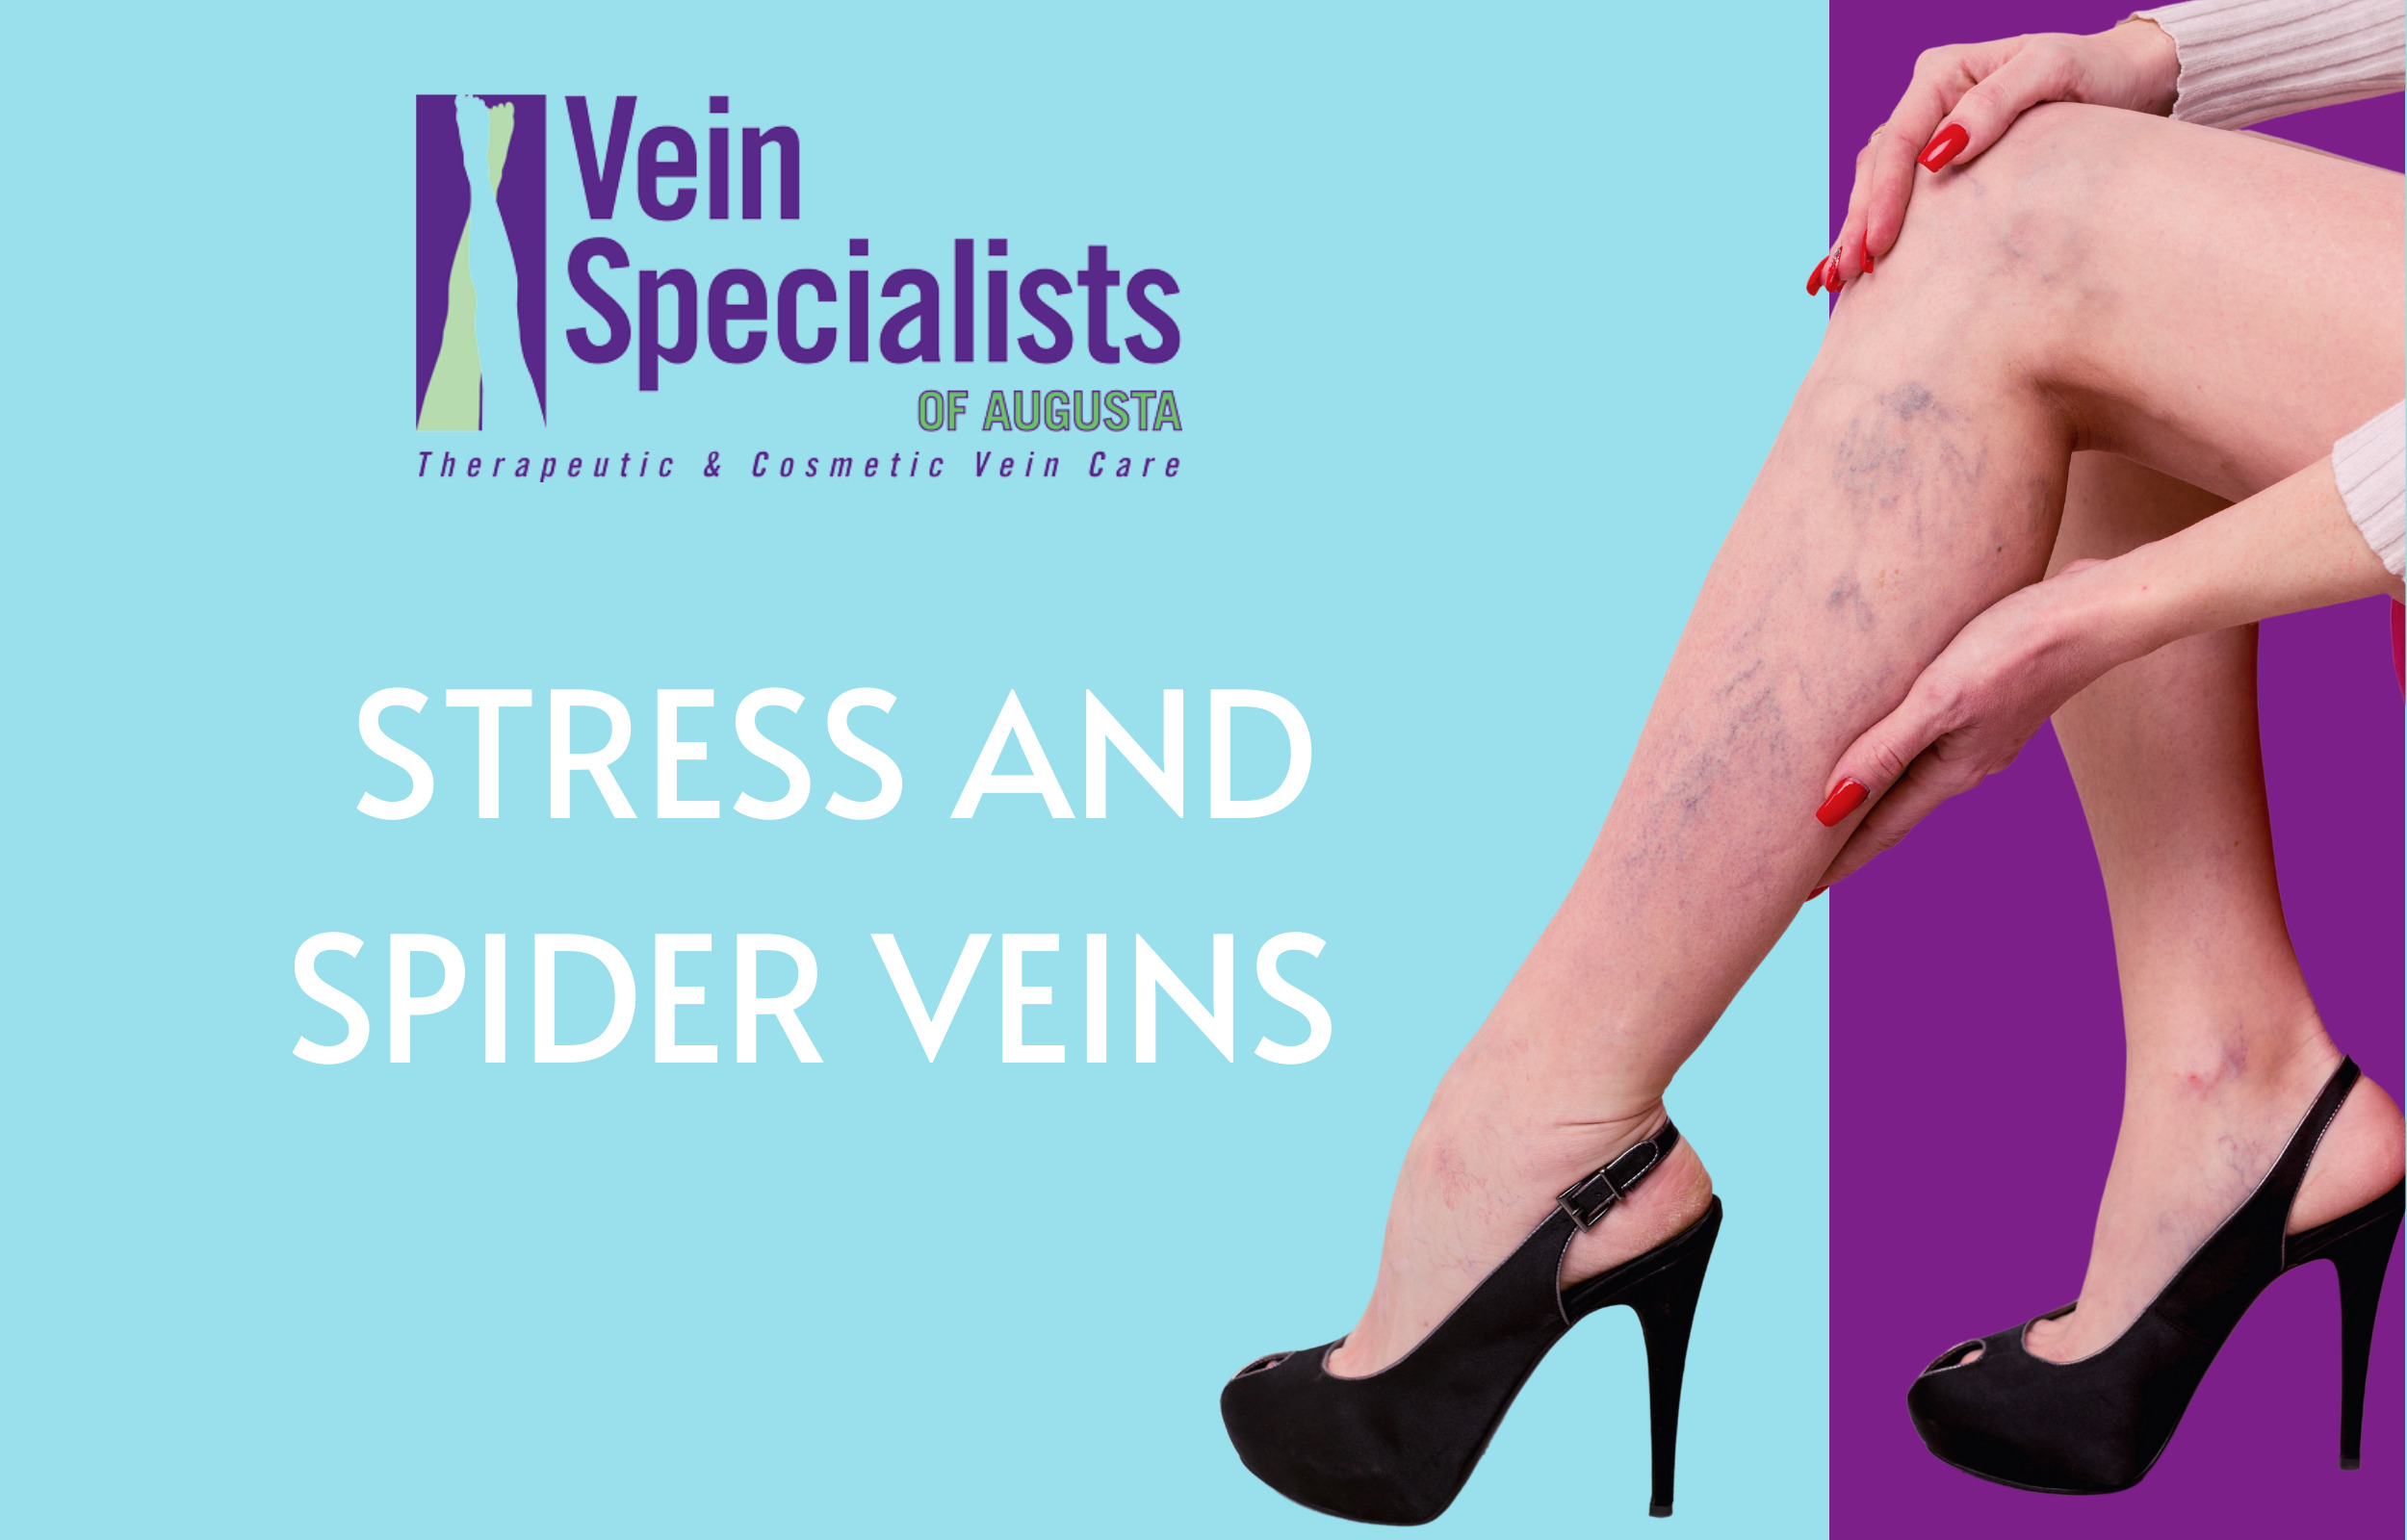 Can Stress Cause Spider Veins On Legs?